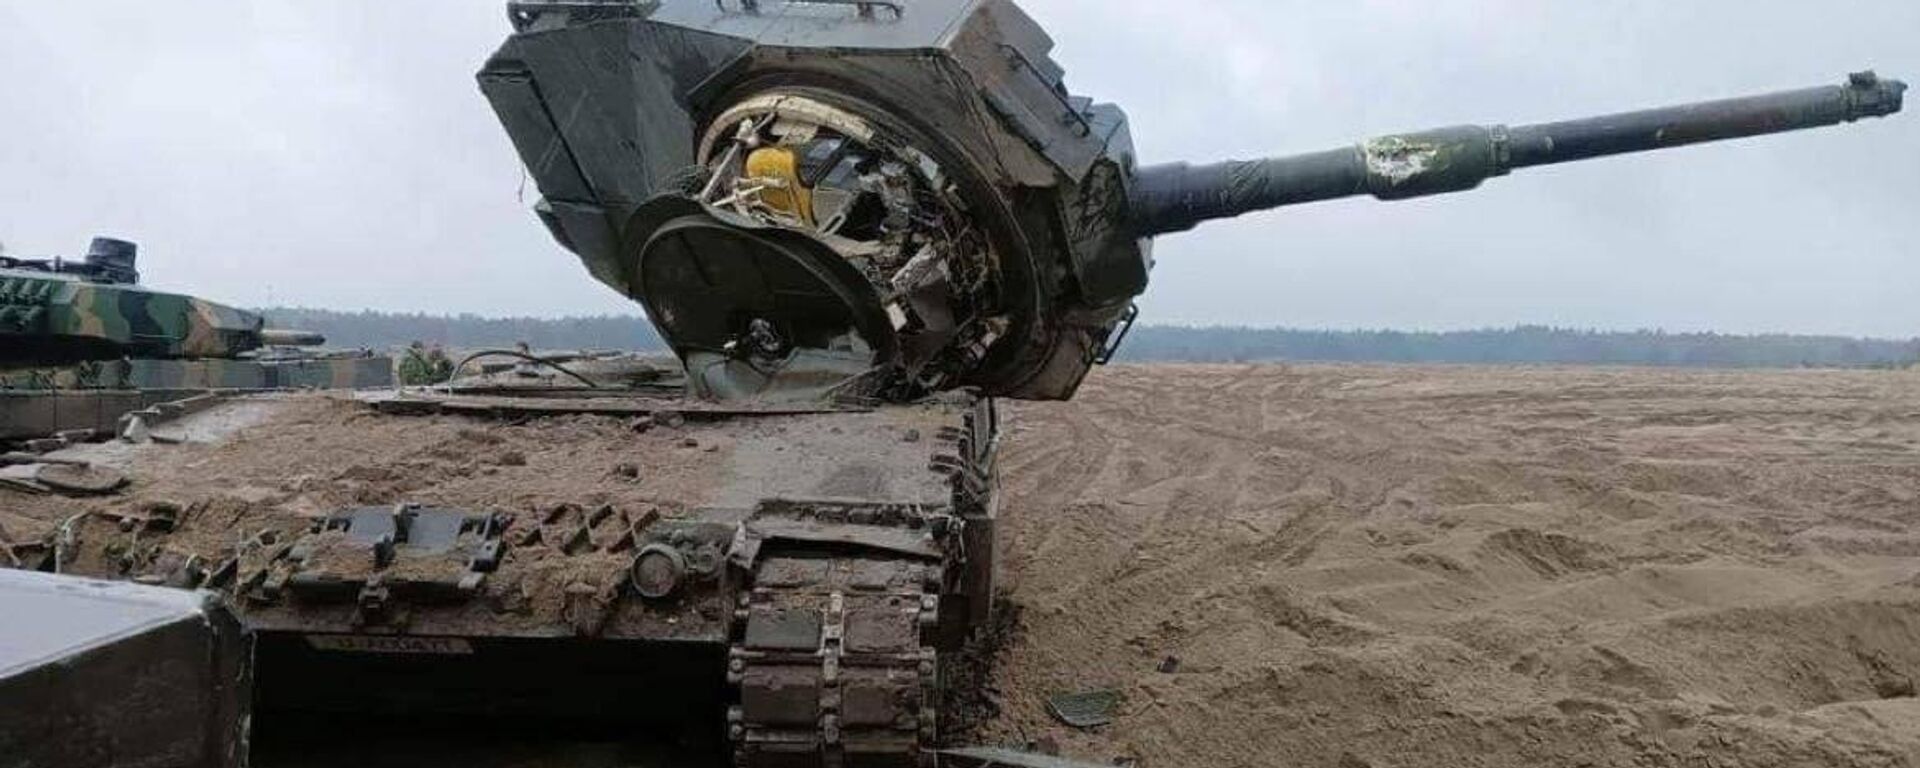 Leopard 2 with its turret ripped off after an accident during training by Ukrainian tankers in western Poland.  - Sputnik International, 1920, 20.07.2023